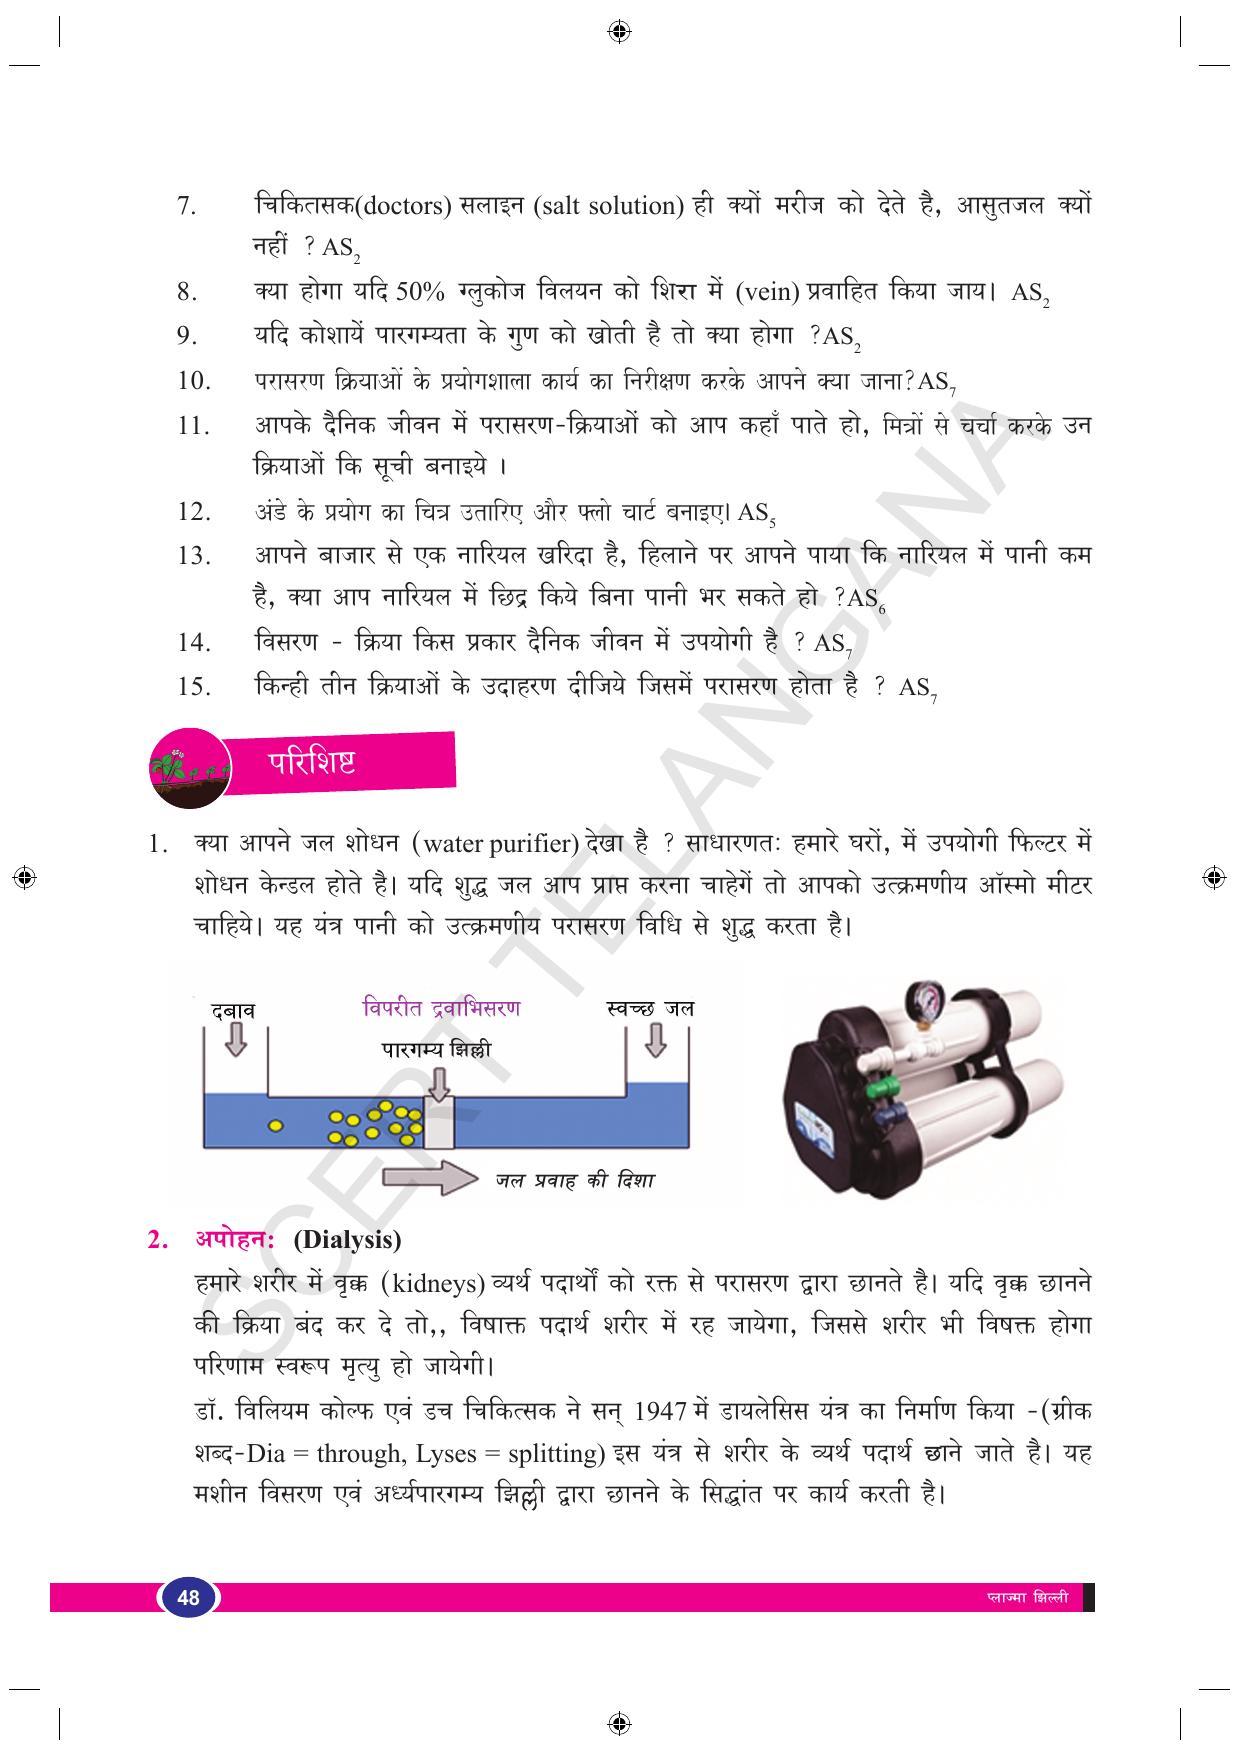 TS SCERT Class 9 Biological Science (Hindi Medium) Text Book - Page 60